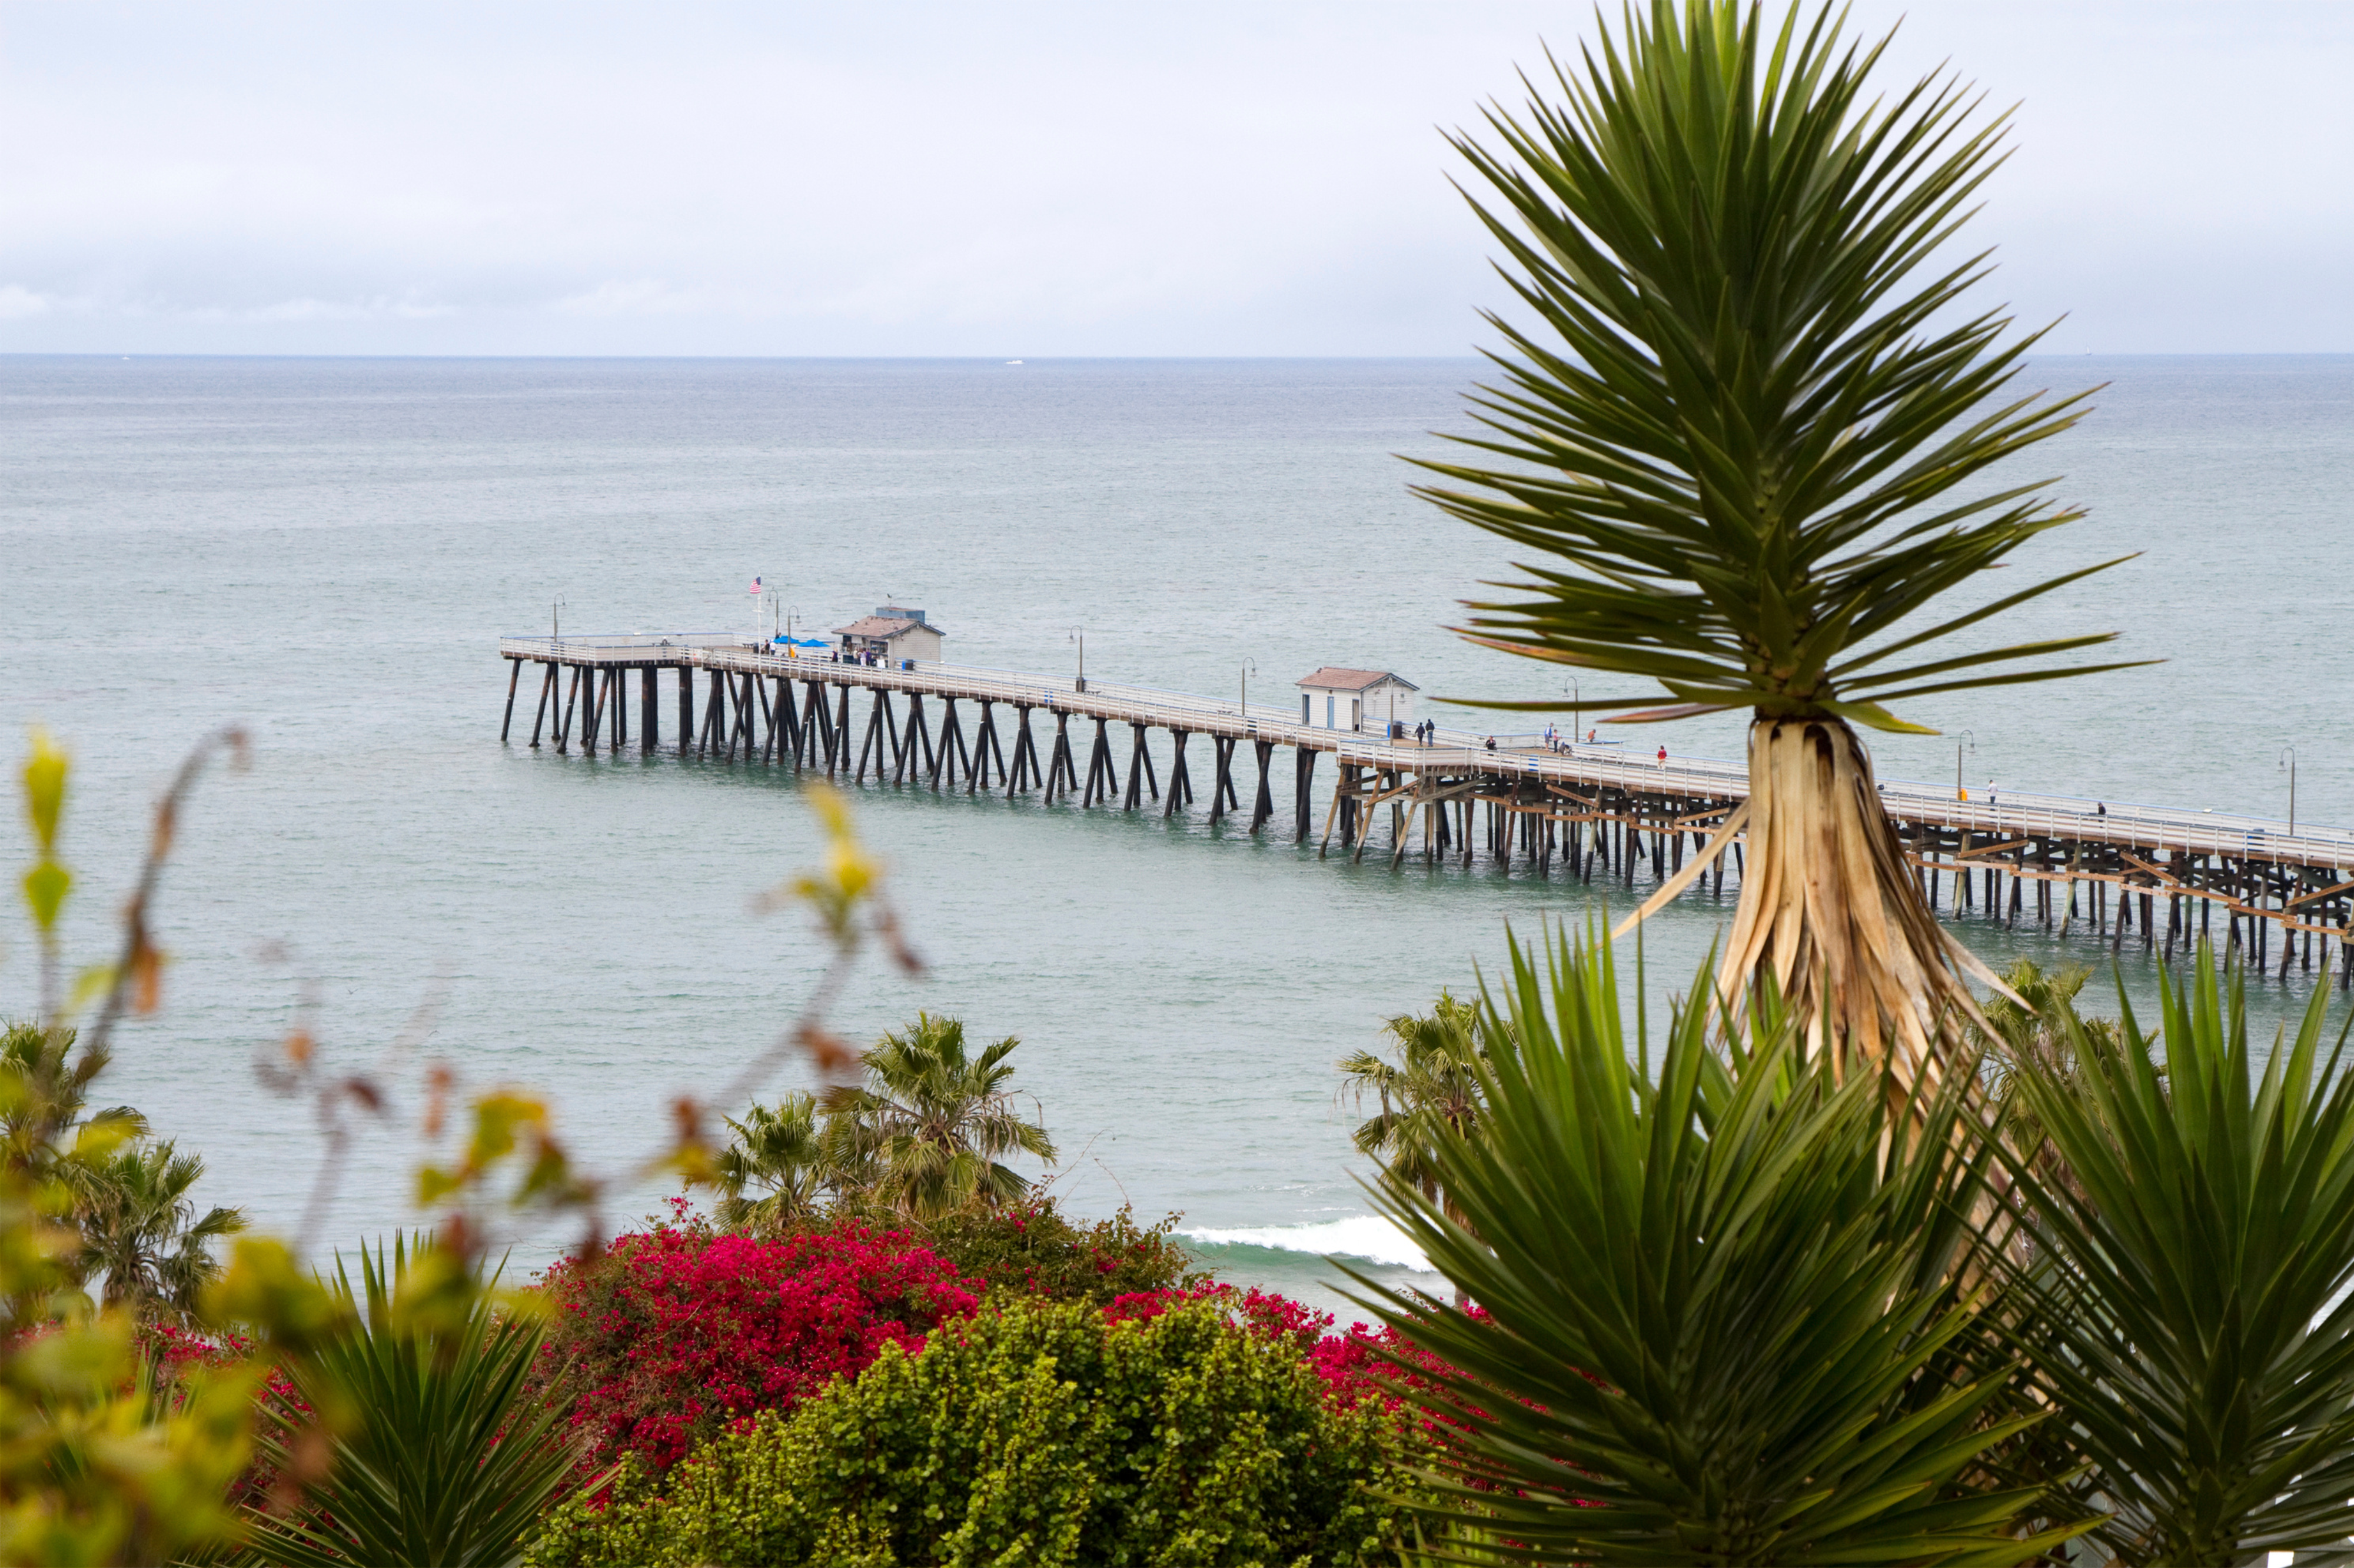 A pier with palm trees and water in the background.